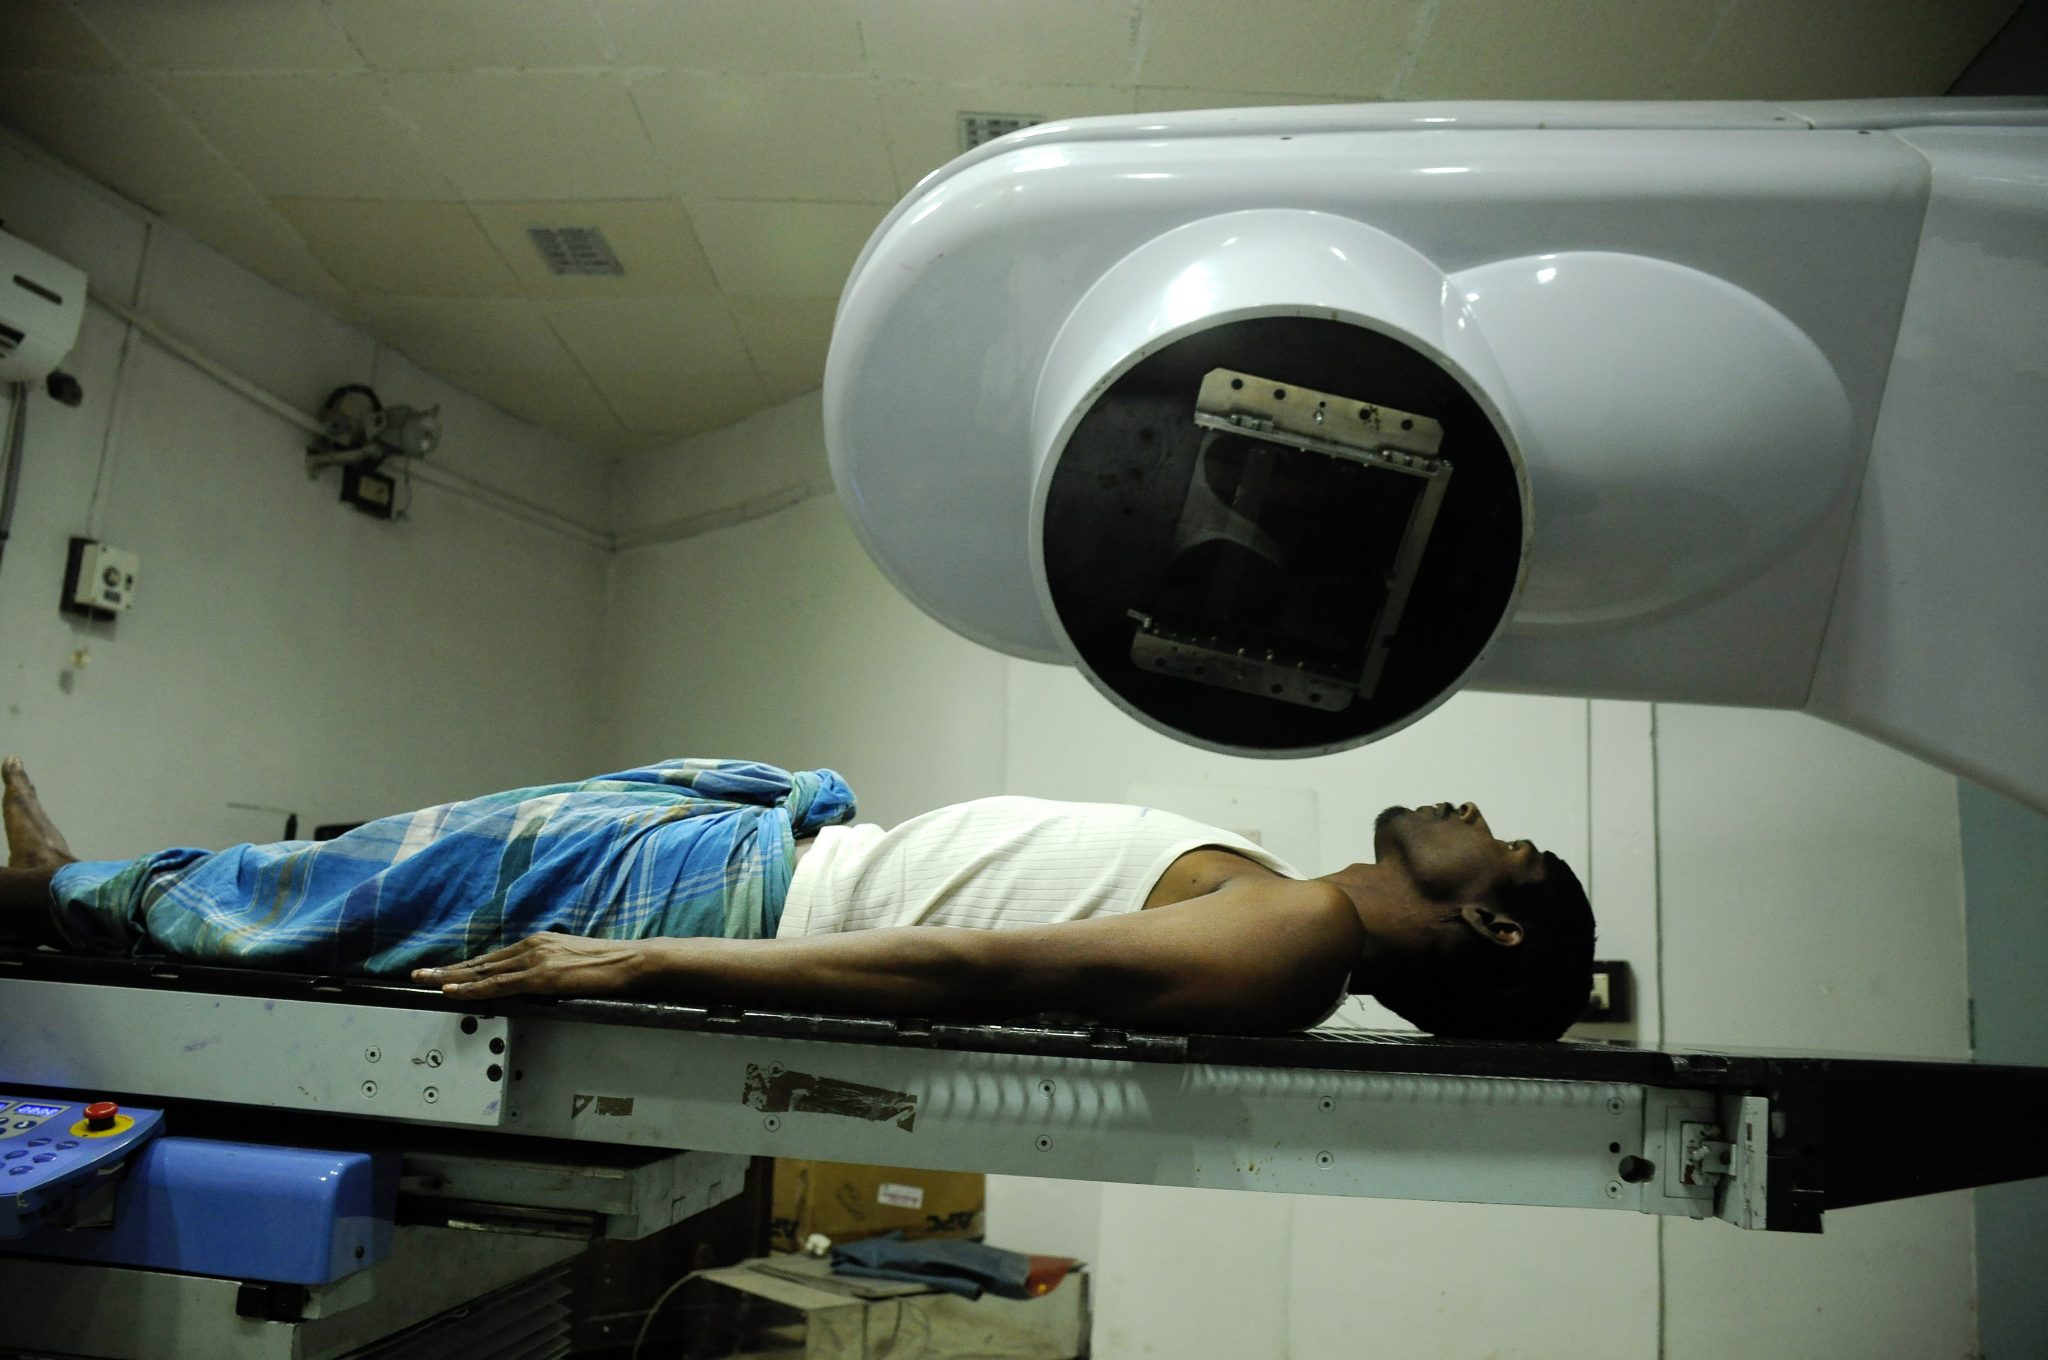 A cancer patient receives radiation treatment at a government cancer hospital  in Agartala, the capital of northeastern state of Tripura on February 3, 2017, on the eve of World Cancer Day  / AFP PHOTO / Arindam DEY